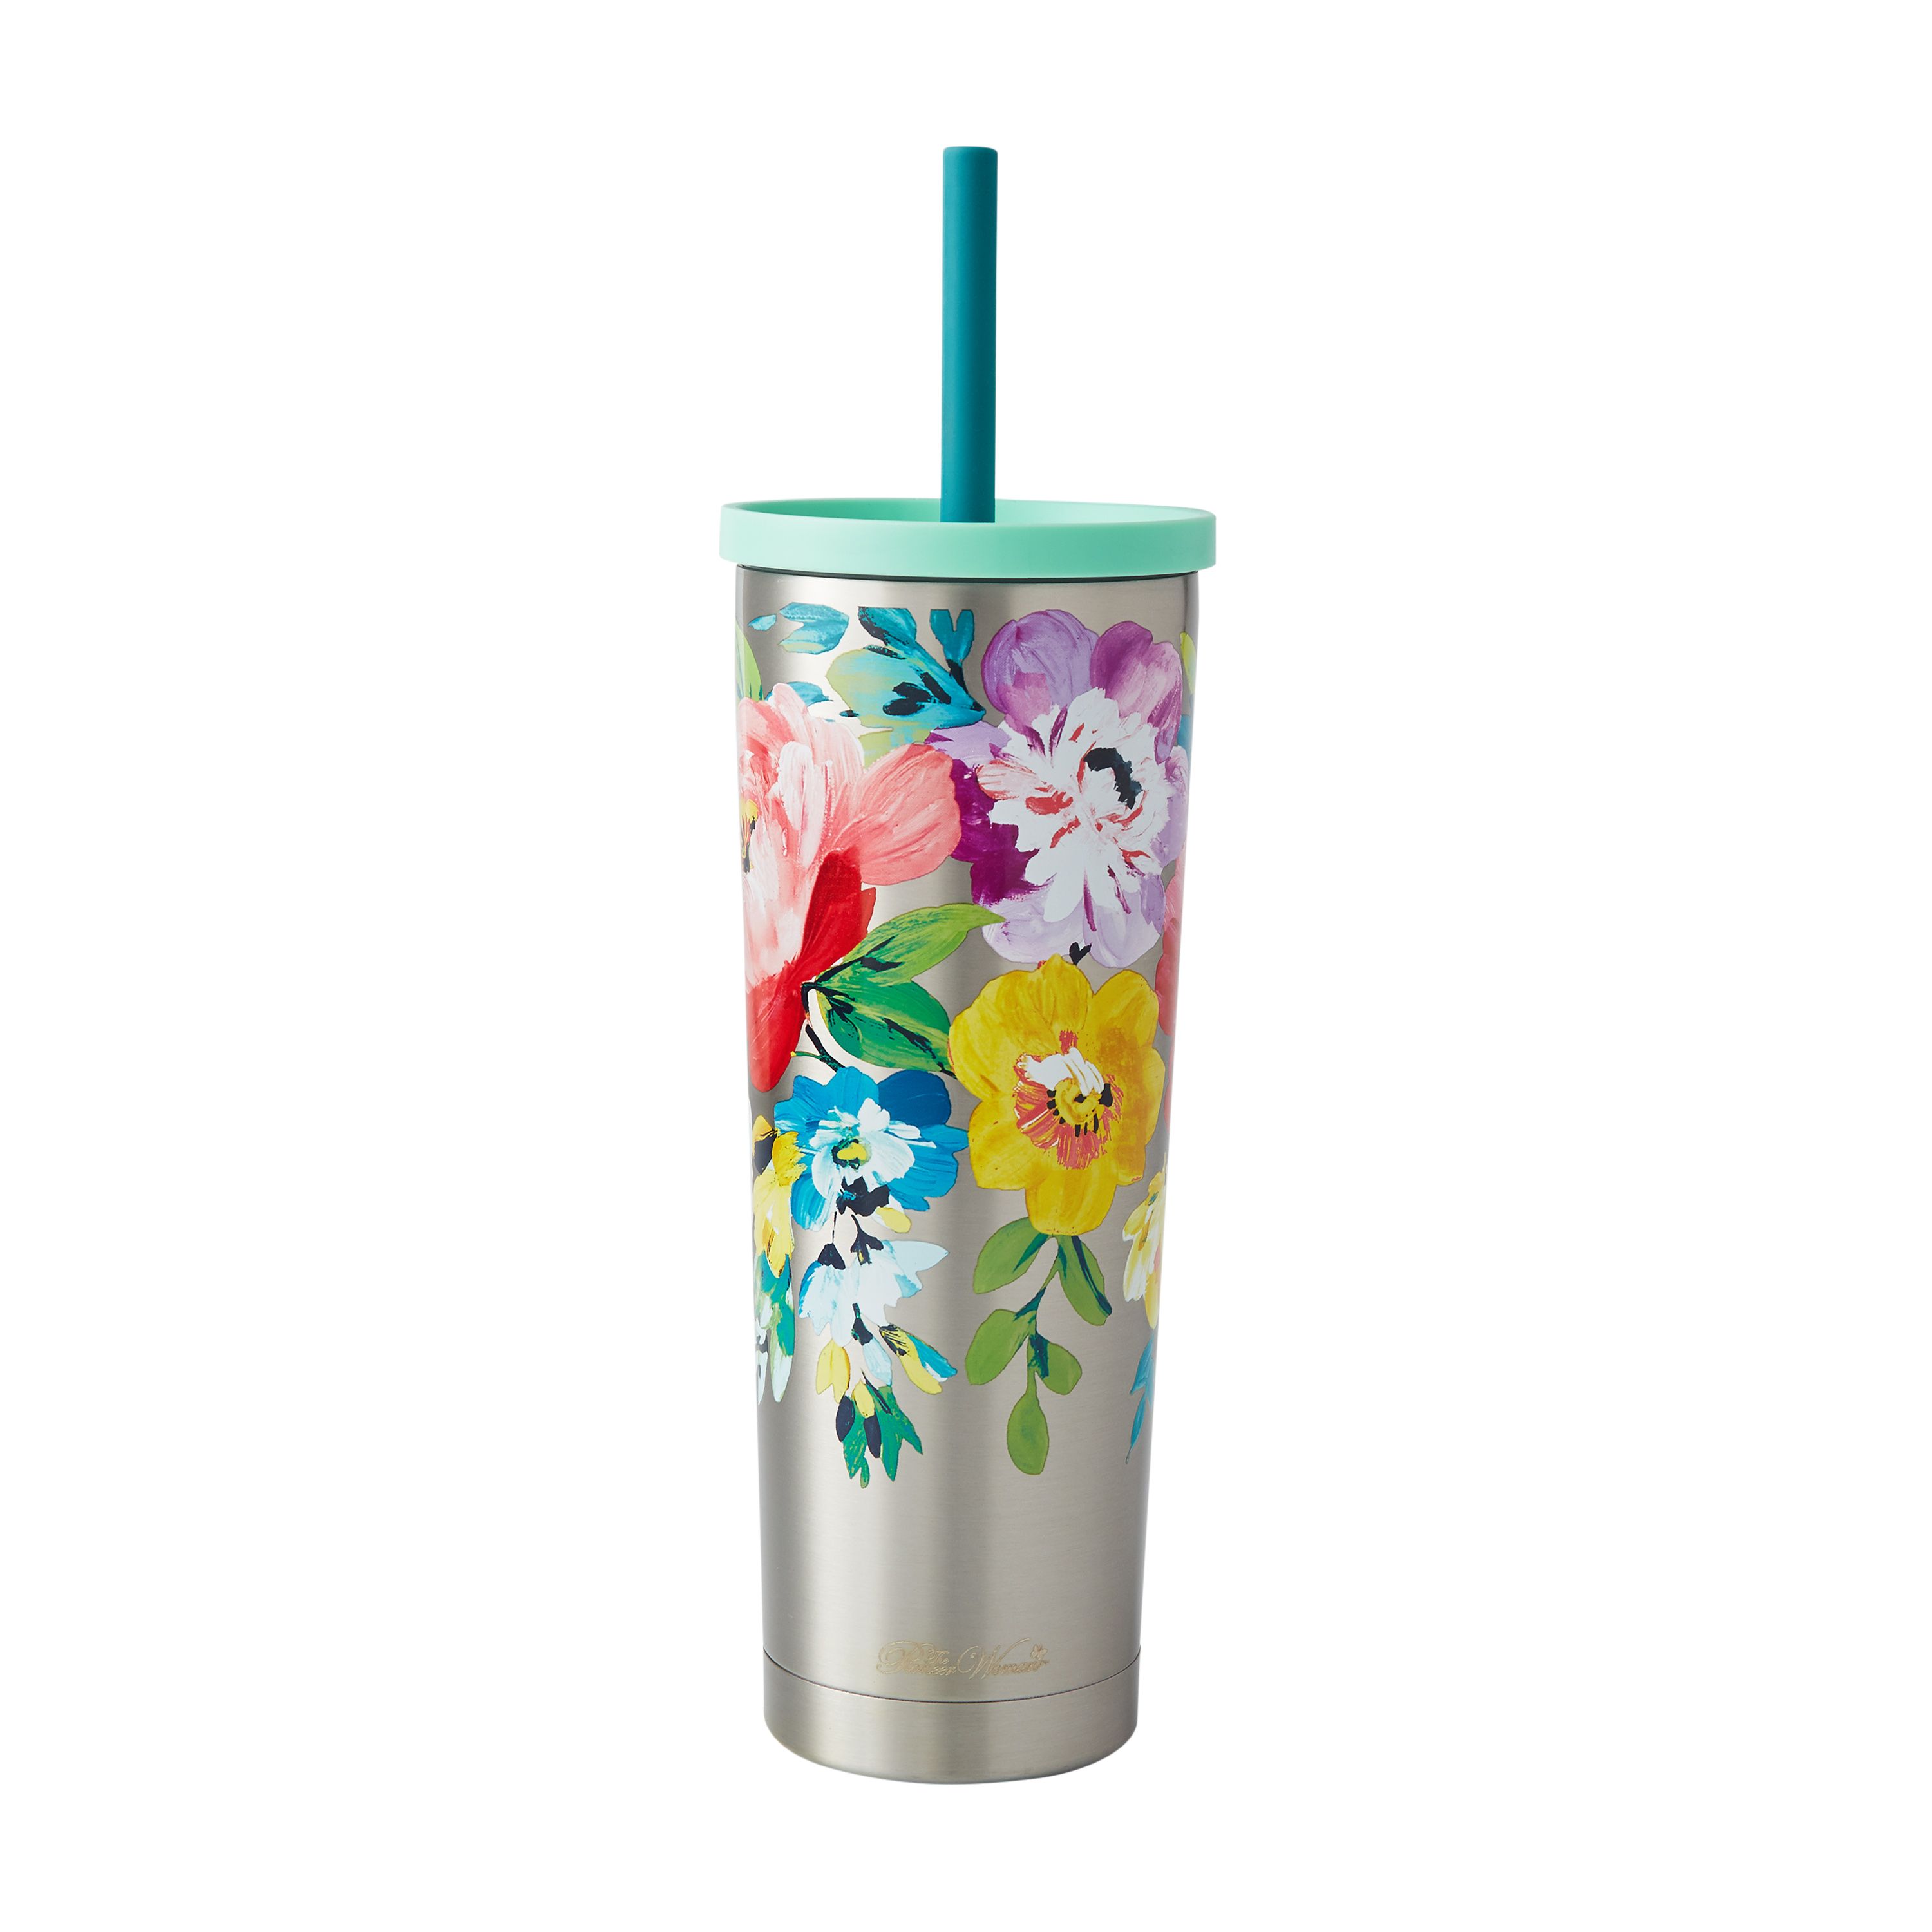 PIONEER WOMAN Tumbler With Sip Lid  Stainless Steel Floral Teal 18 oz NEW 